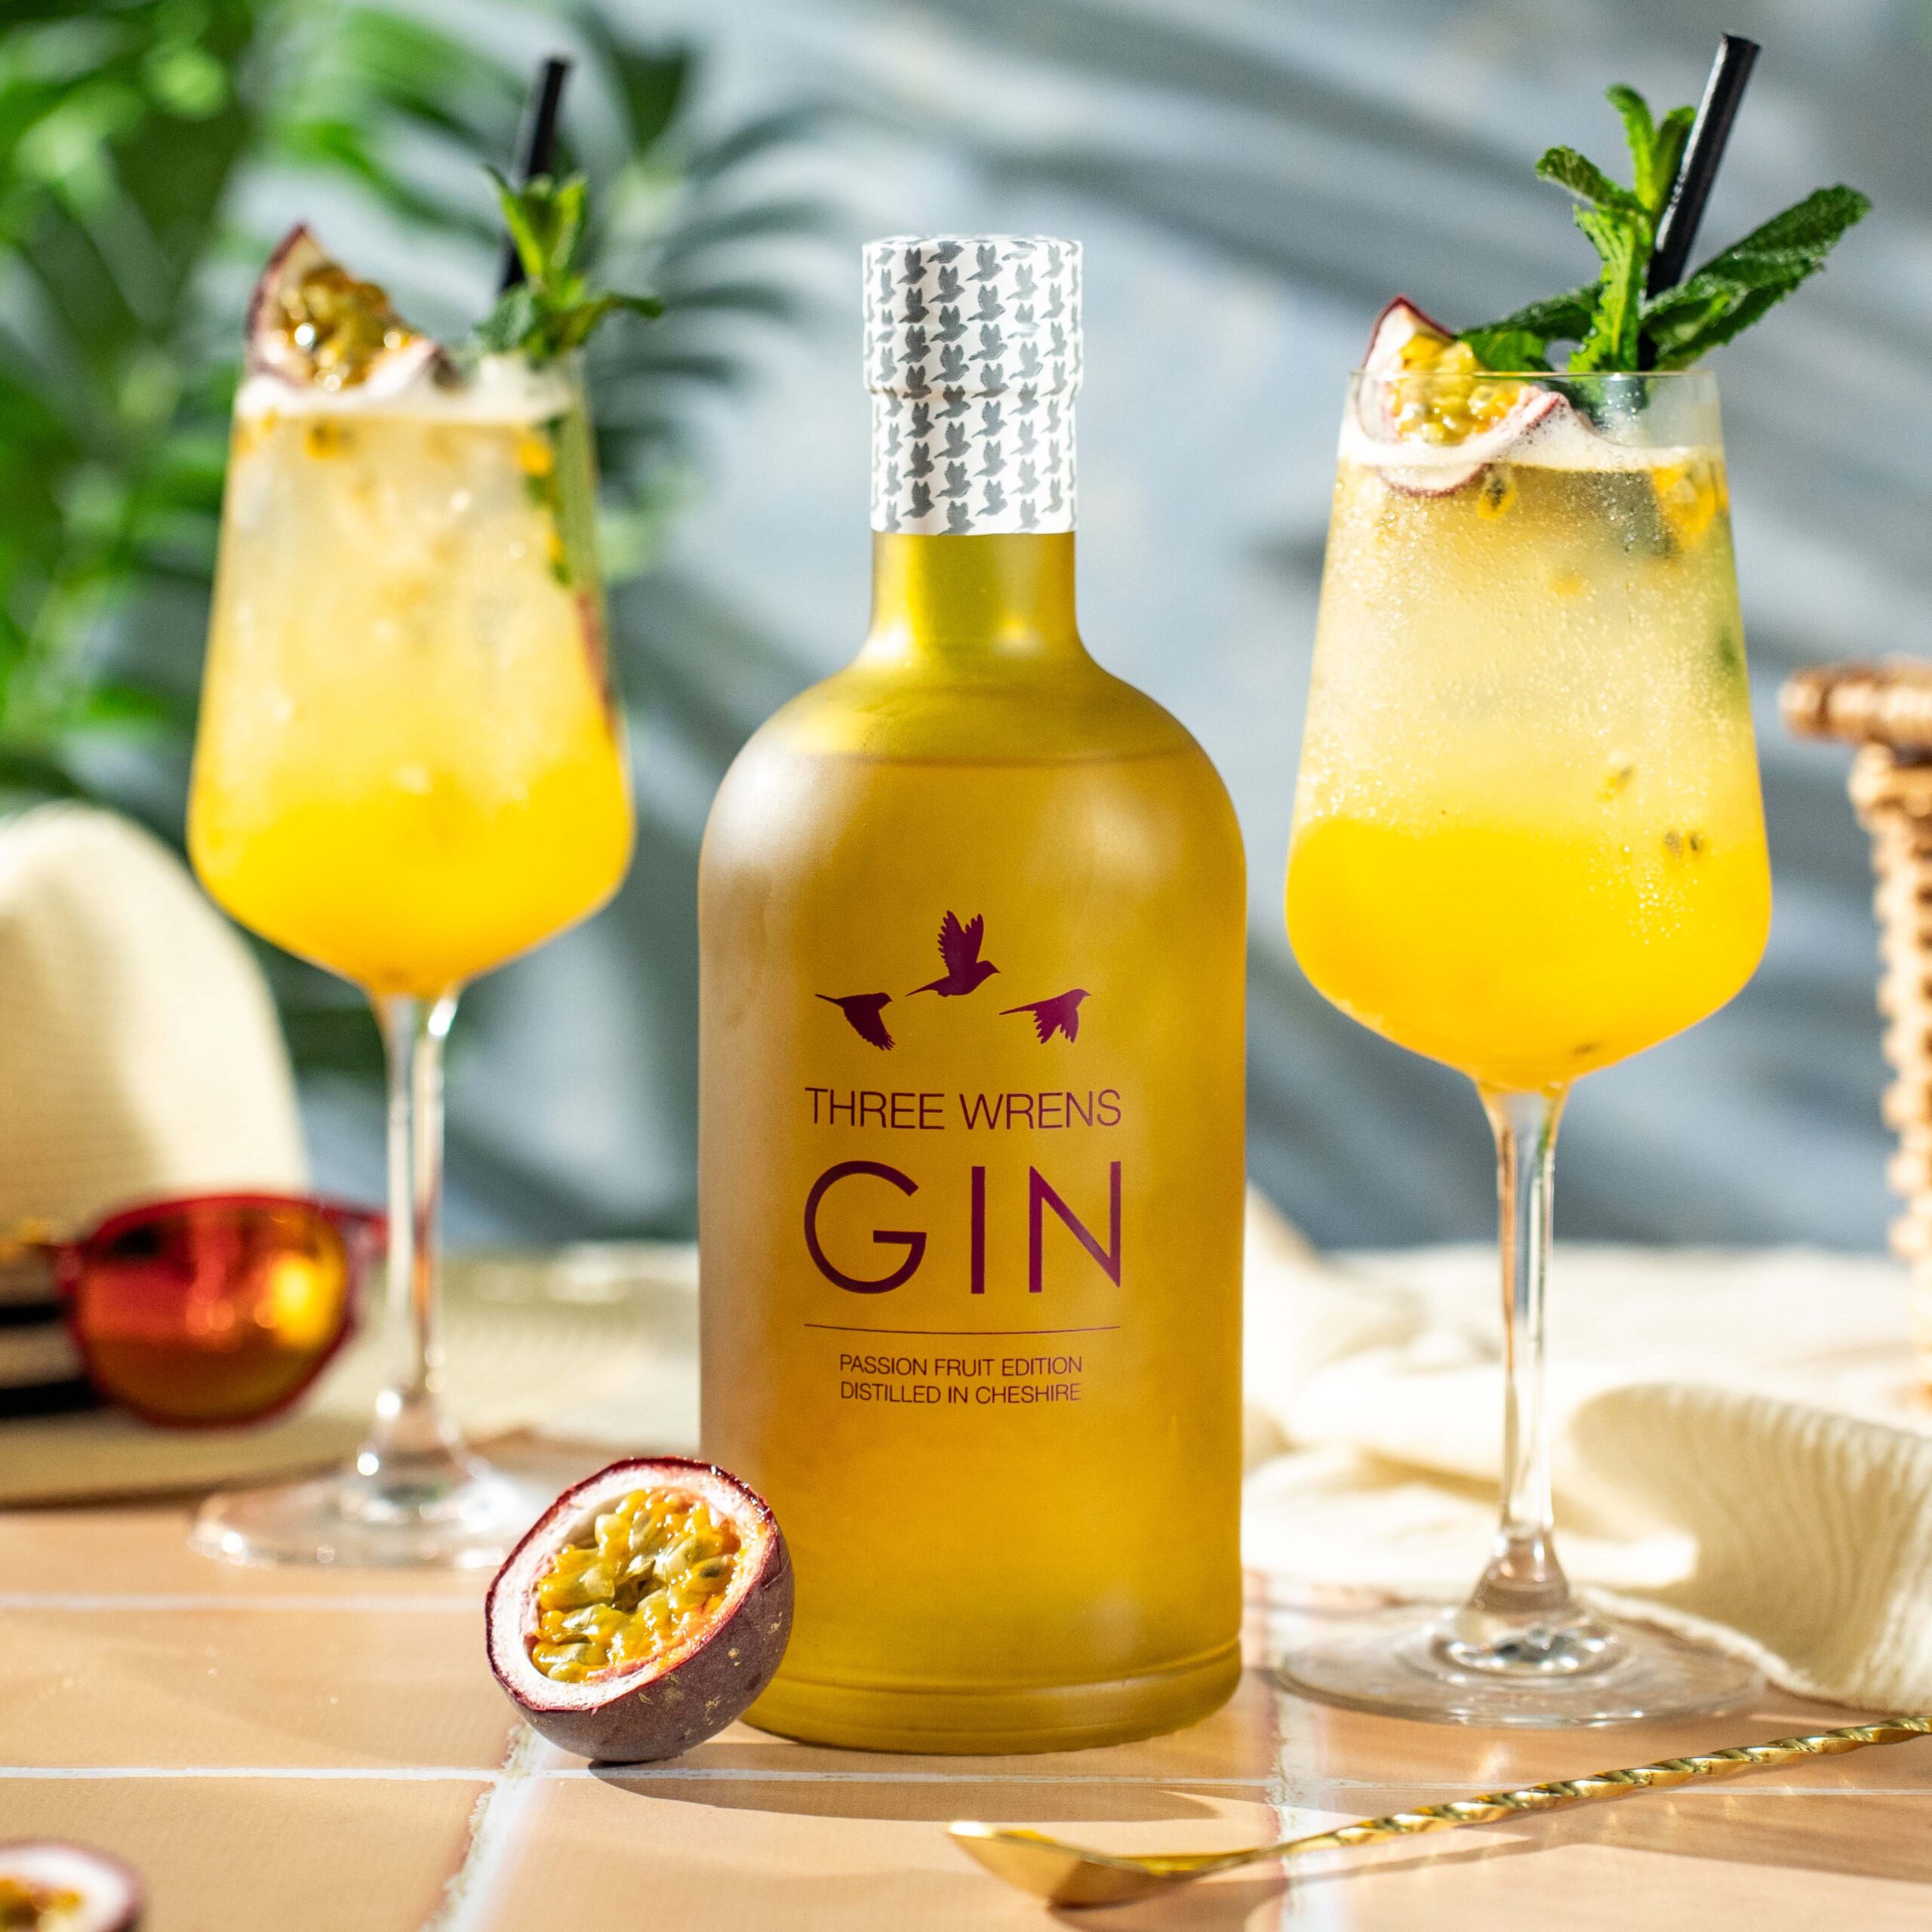 passion fruit flavour gin 70cl bottle with poco grande glasses and passion fruit slices sunshine terracotta tiles